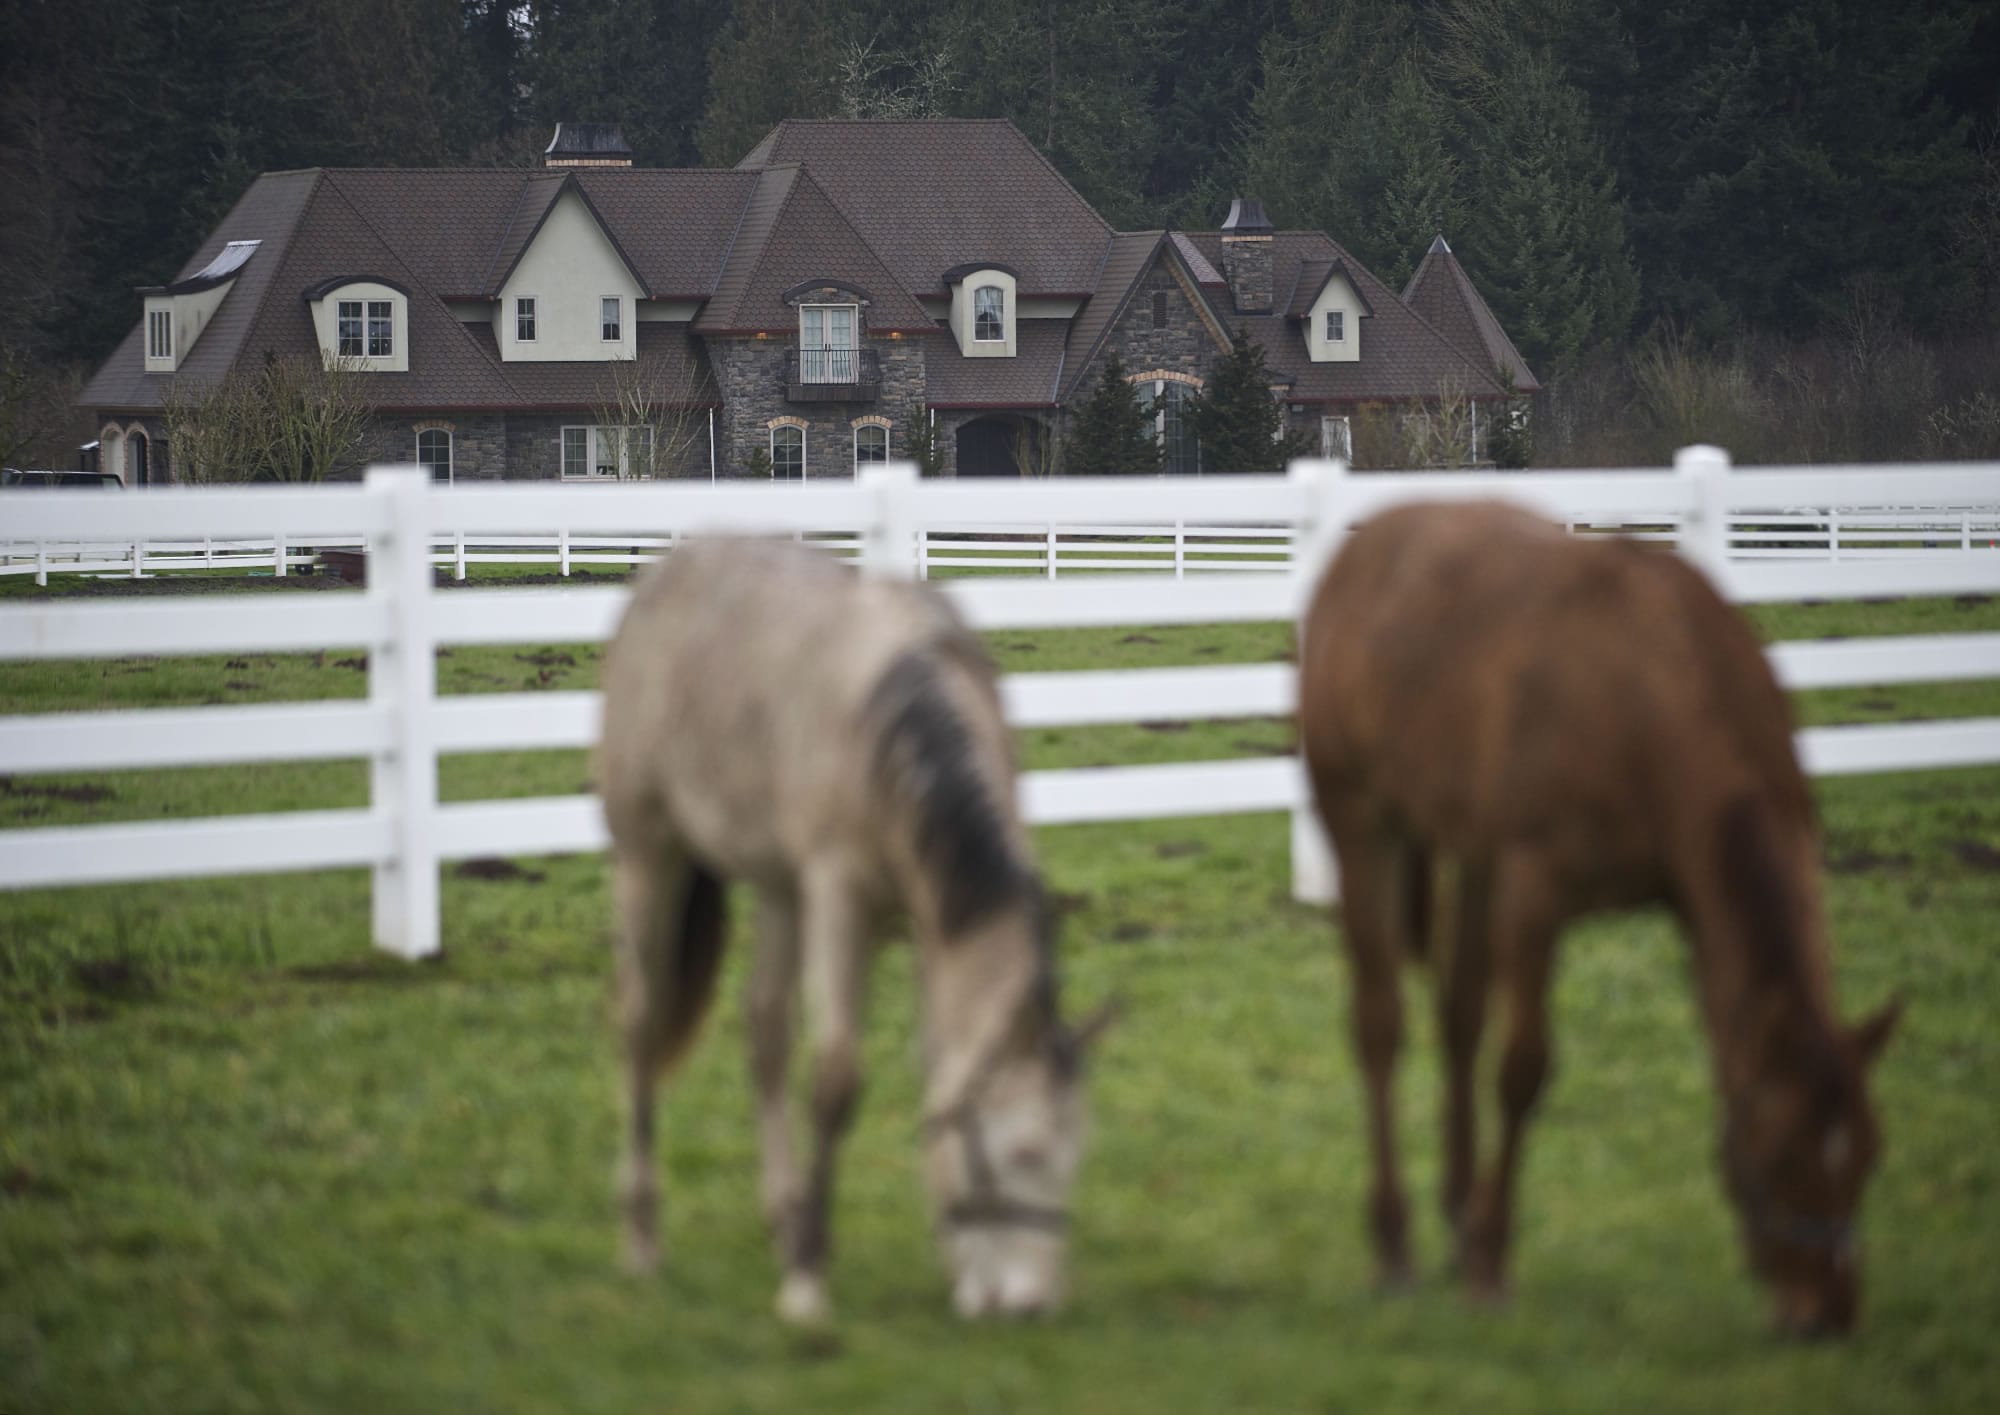 Houses on acreage in a pastoral setting attract families to the Brush Prairie-Hockinson ZIP code, the wealthiest in Clark County and the second-richest in the Portland metropolitan area.